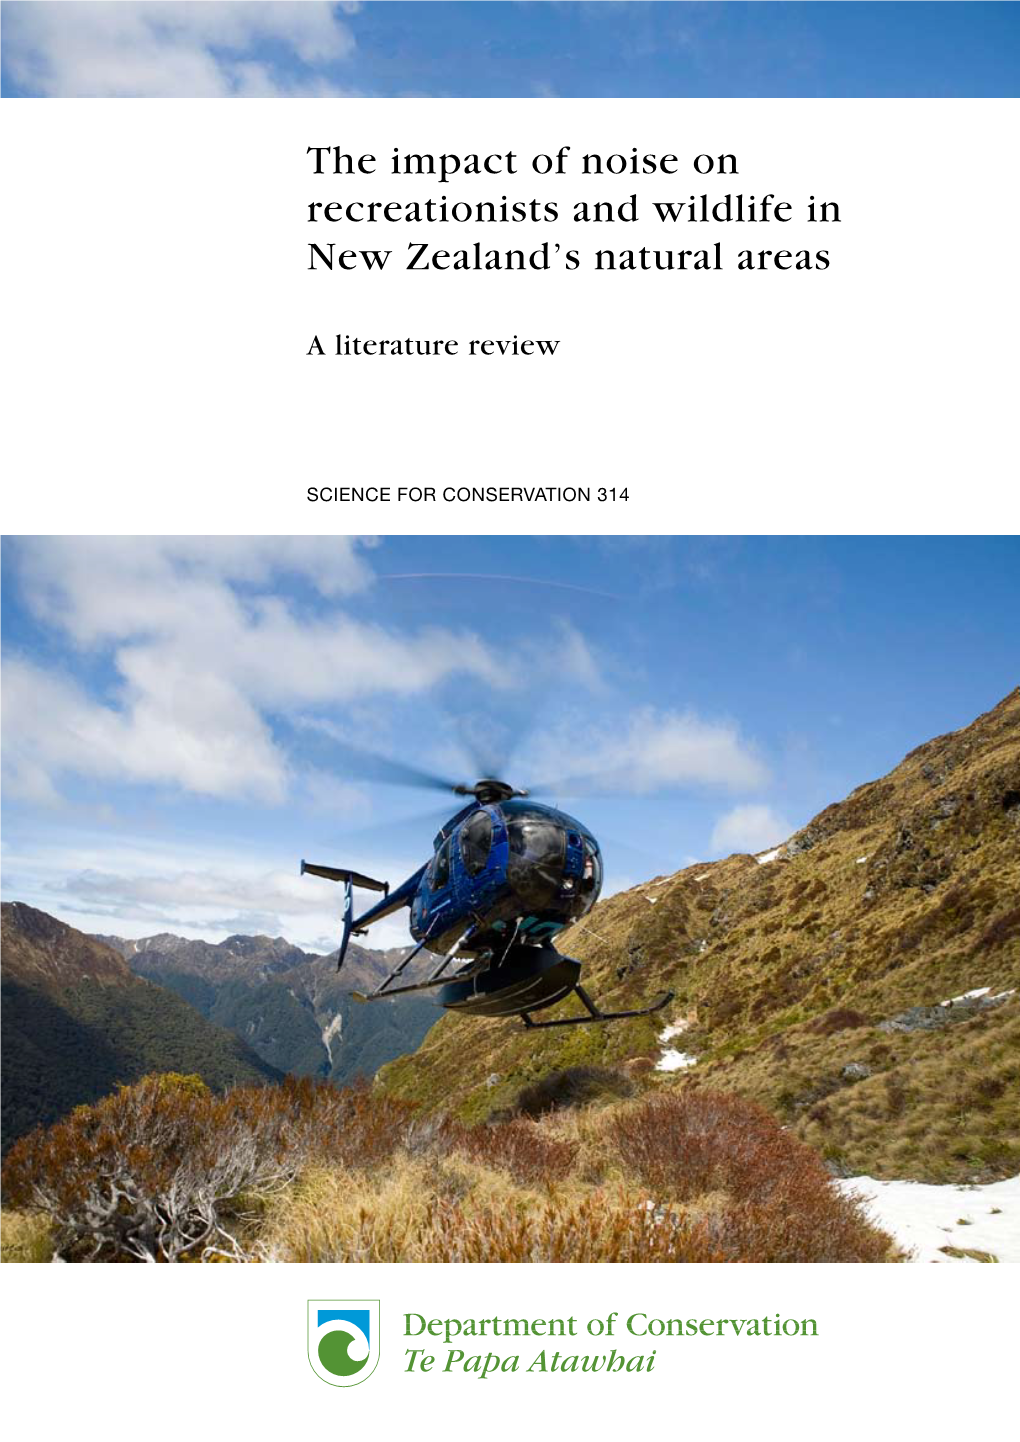 The Impact of Noise on Recreationists and Wildlife in New Zealand's Natural Areas